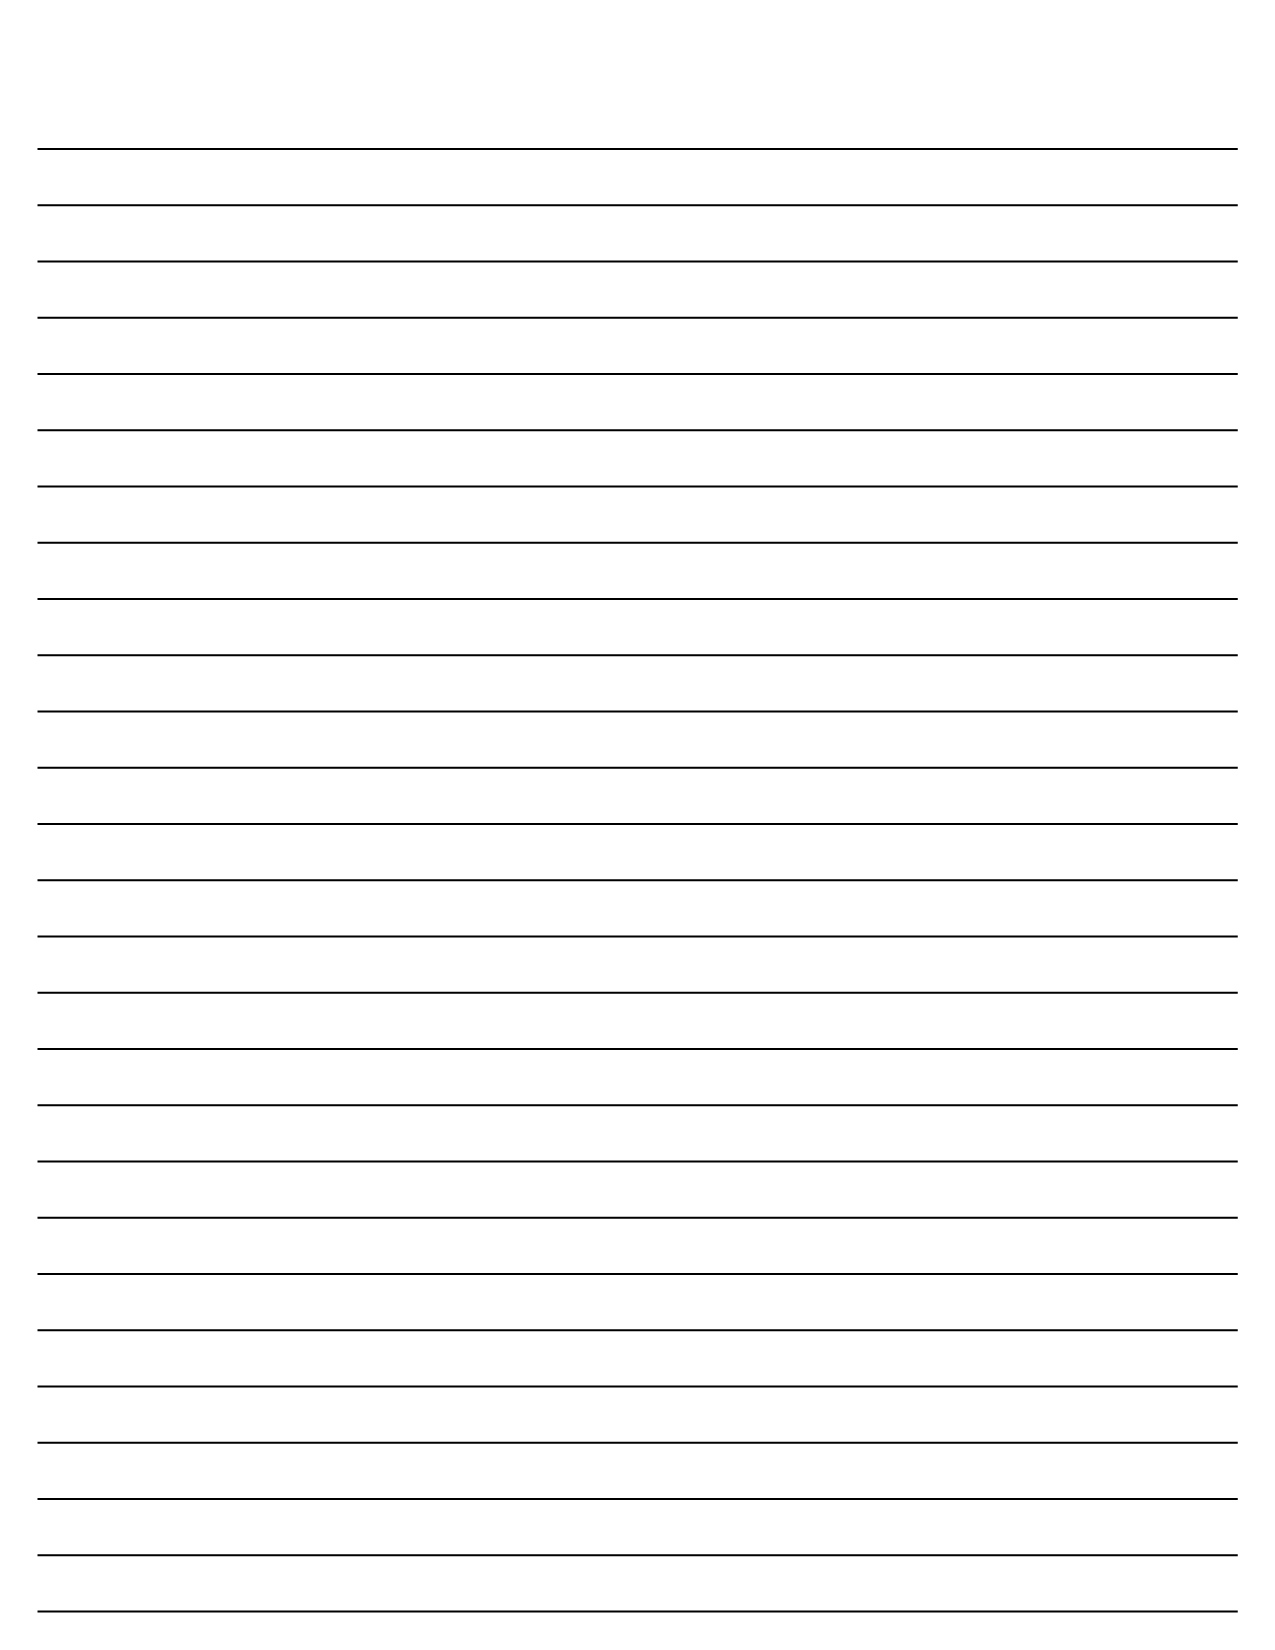 Print Lined Paper Free